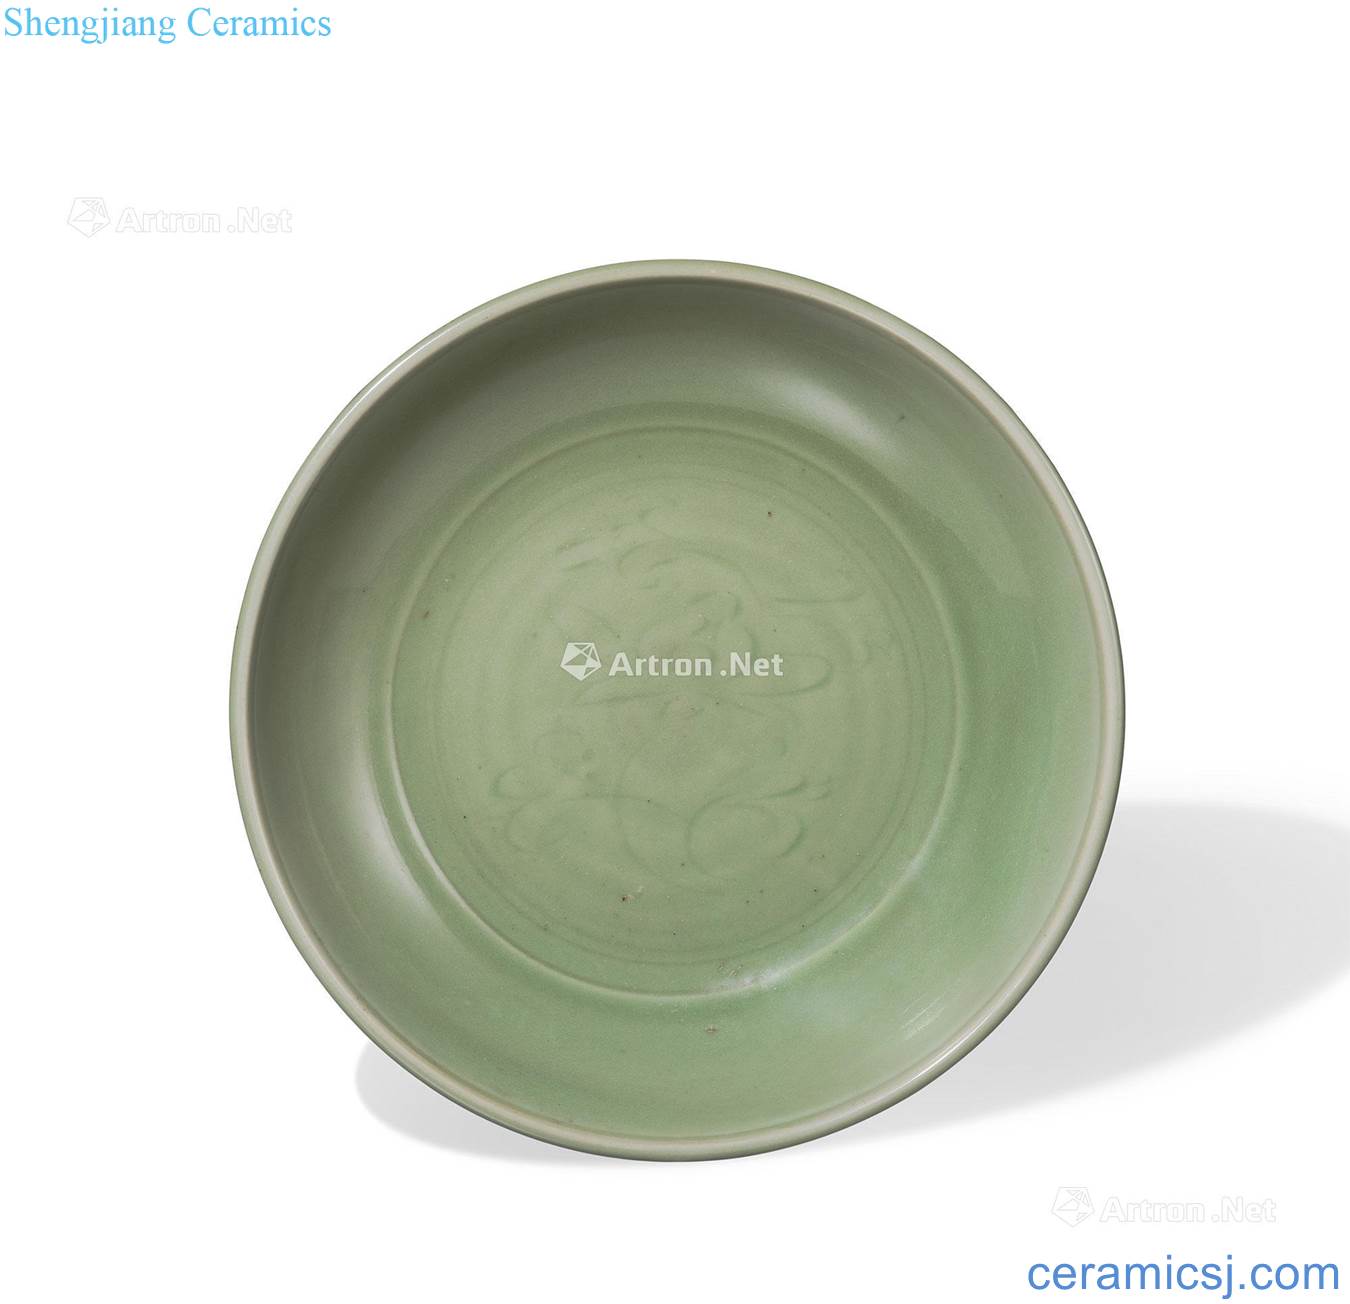 Early Ming dynasty Longquan celadon green glaze scratching the broader market